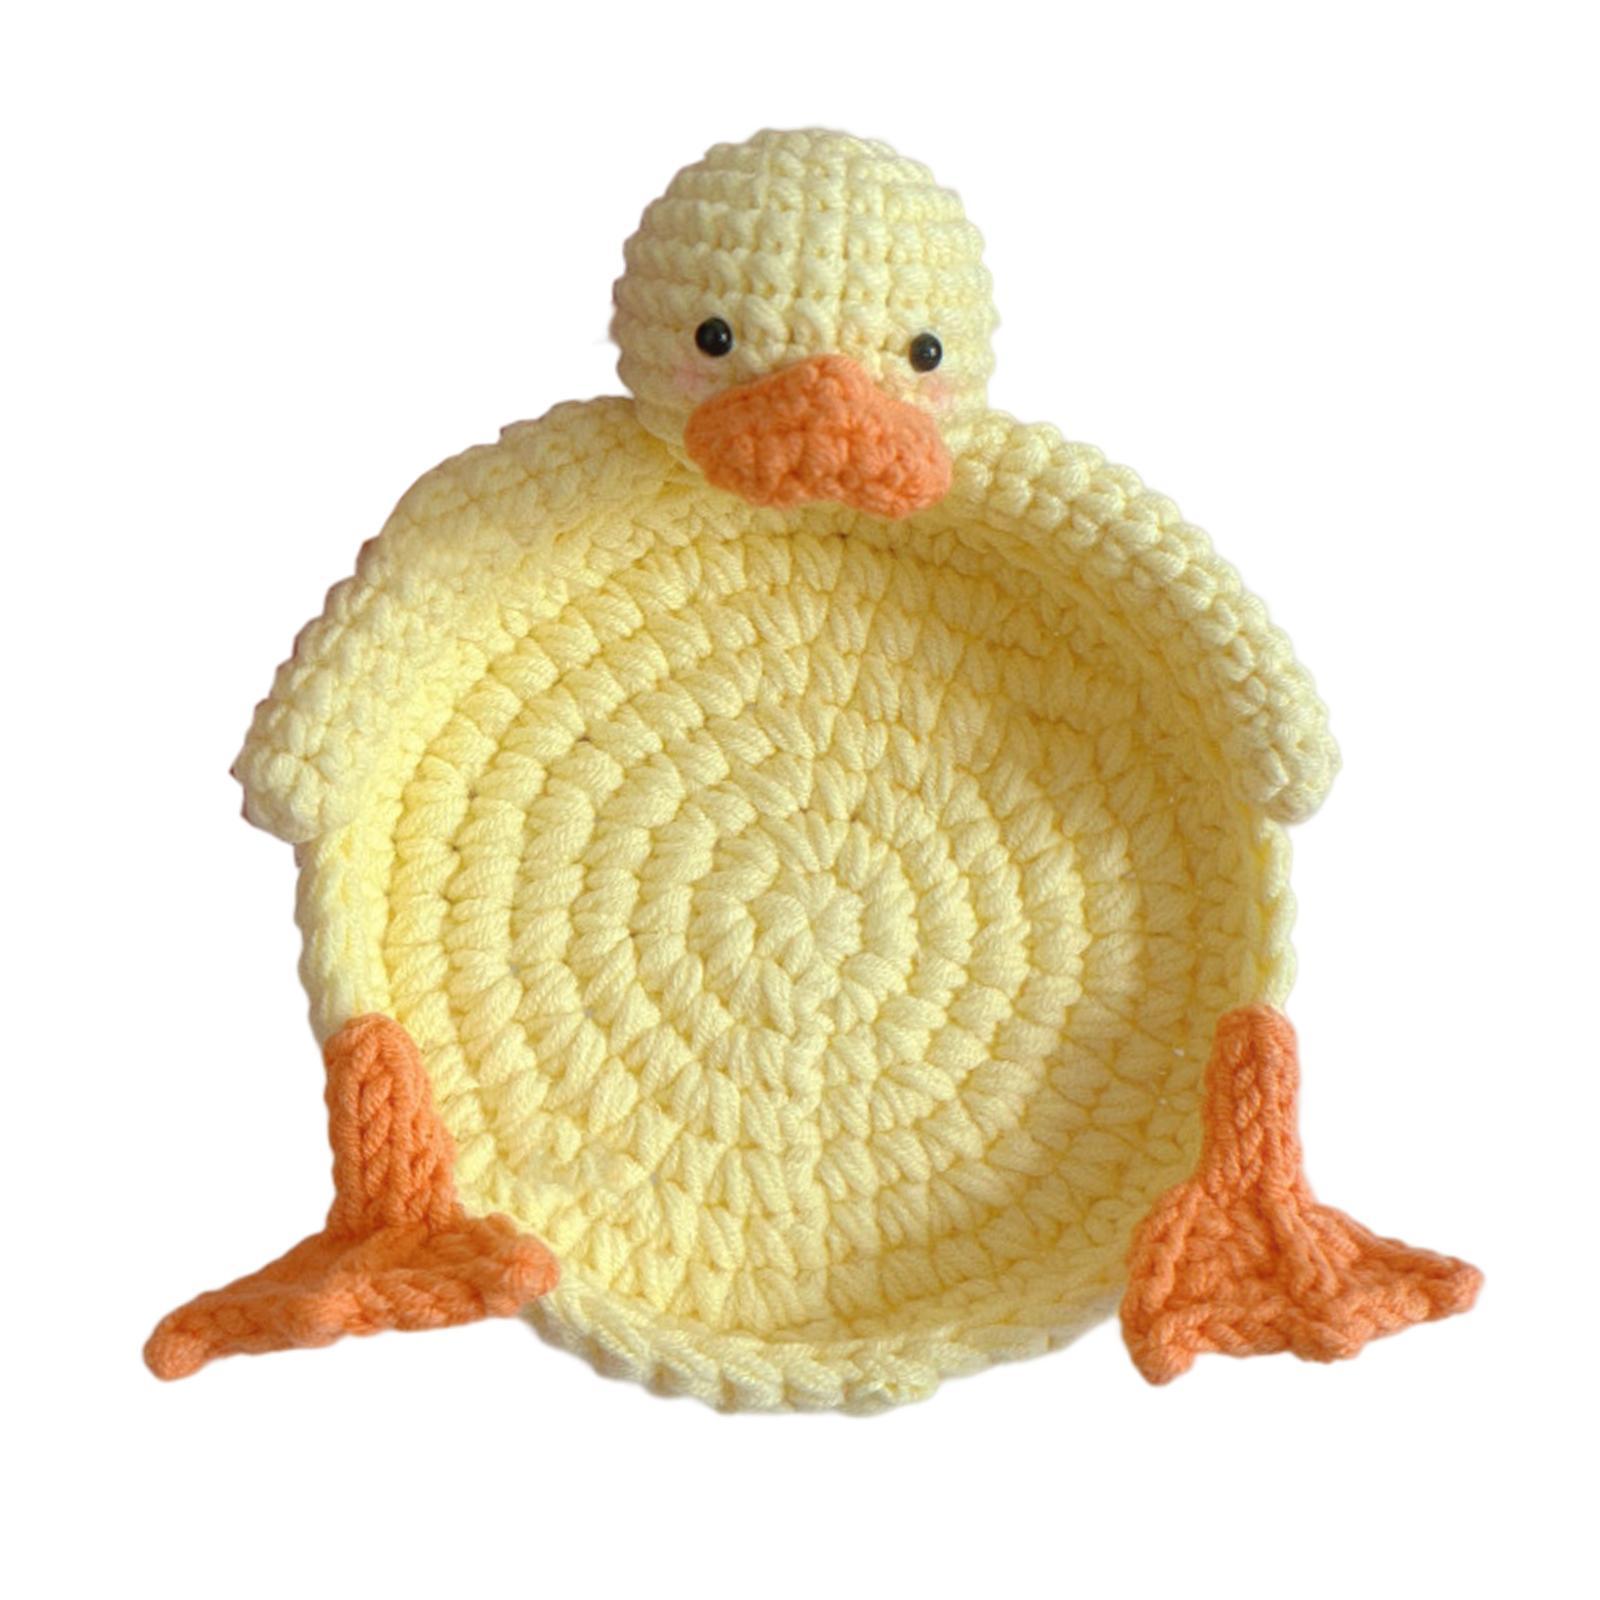 Braided Coaster for Drinks Duck Shaped Coaster for Apartment Home Countertop